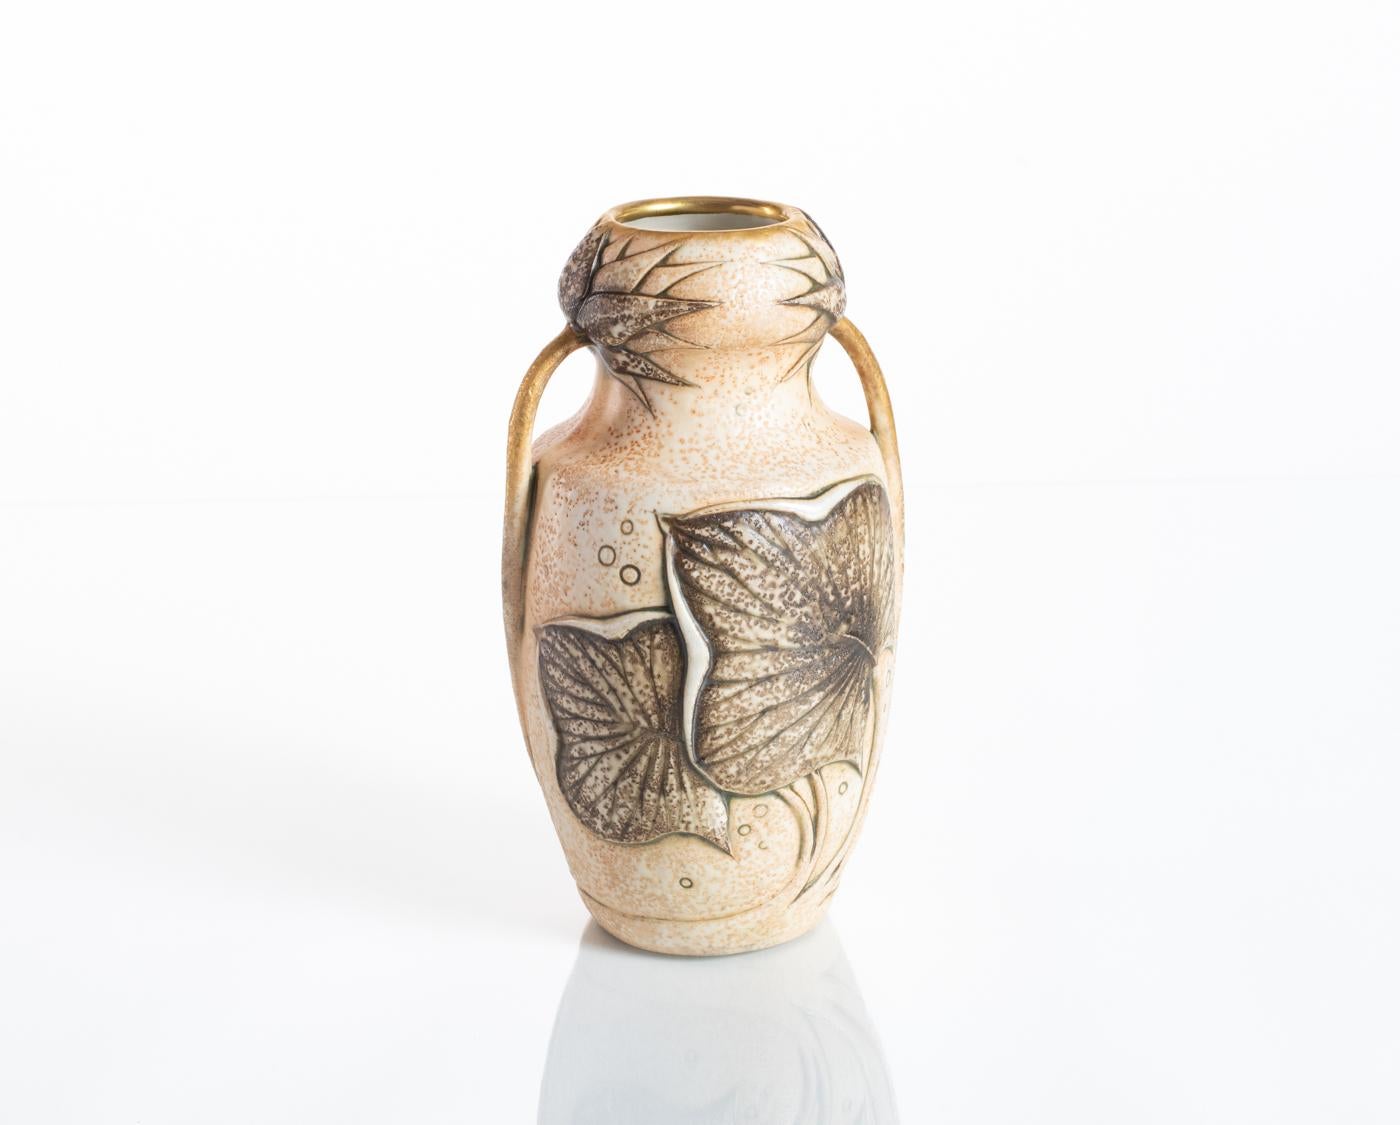 Amphora Vase with Water Lilies by Ernst Wahliss, att. Paul Dachsel, c. 1900 For Sale 3